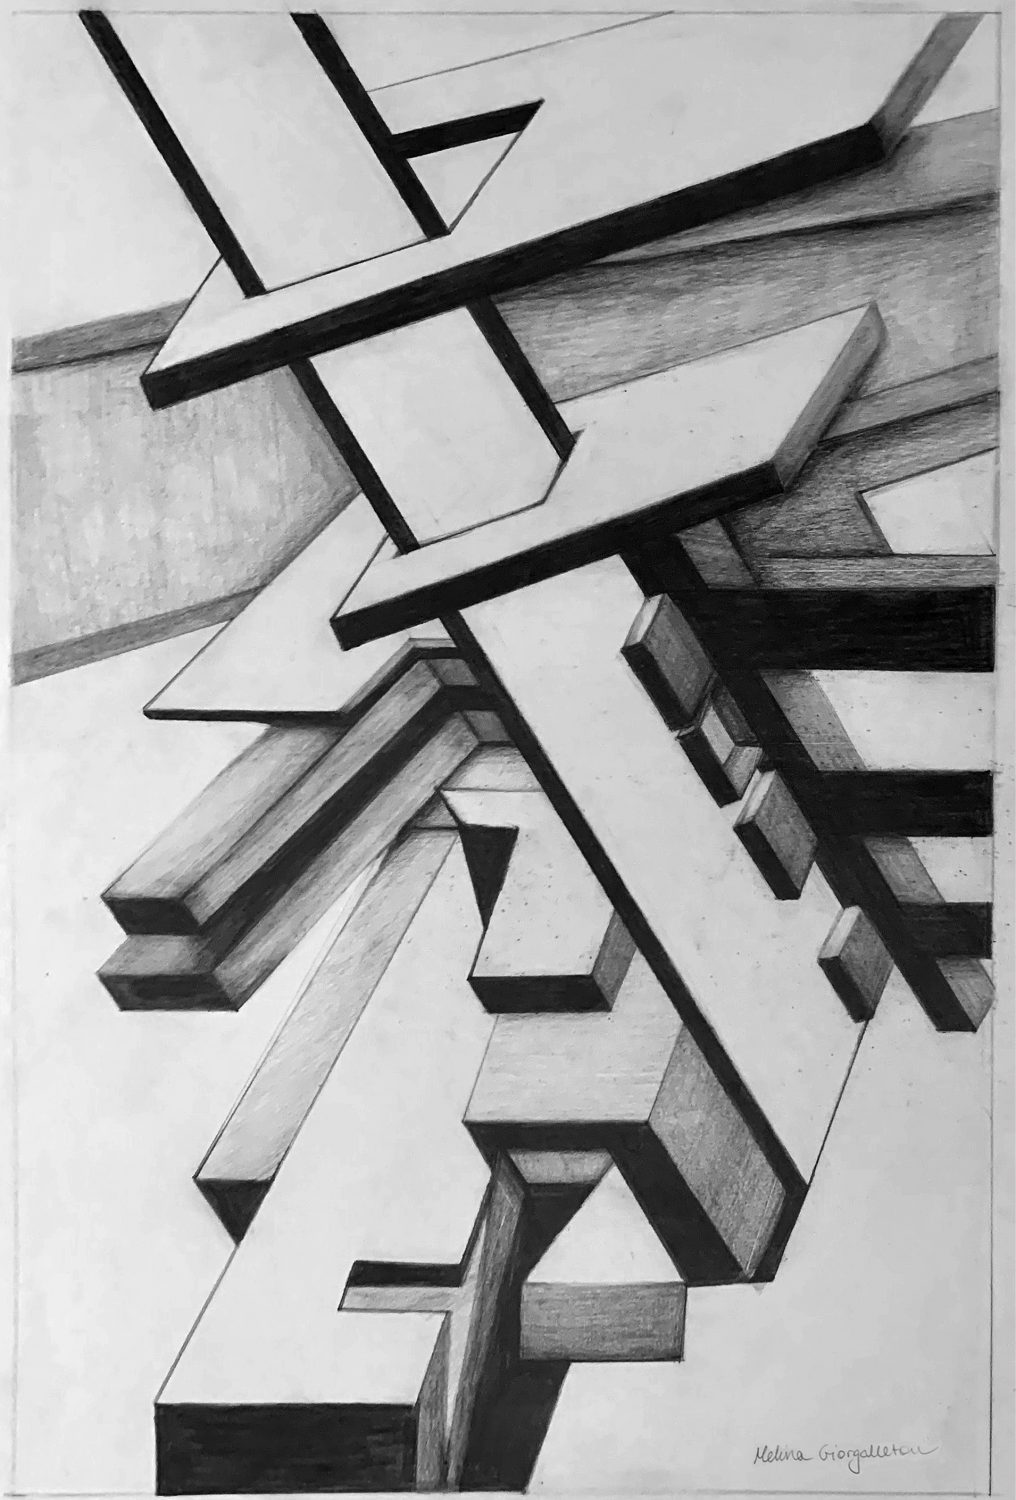 thumbnail of Architectural Abstraction by Melina Giorgalletou. Medium: Graphite on bristol. Size 17 x 14 inches Date 2020